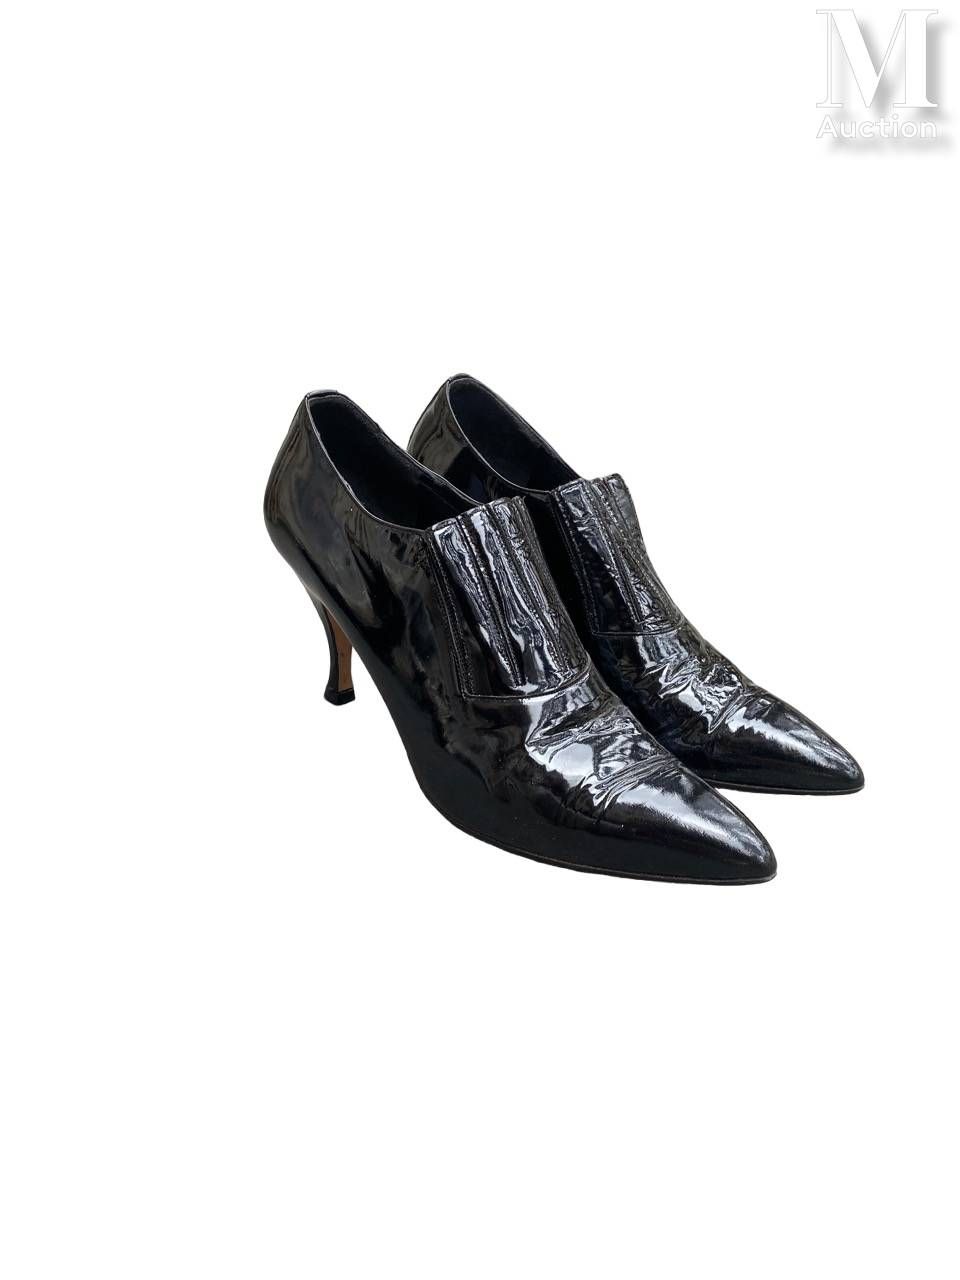 CHANTAL THOMASS - Automne-hiver 1986 Pair of shoes
in black patent leather with &hellip;